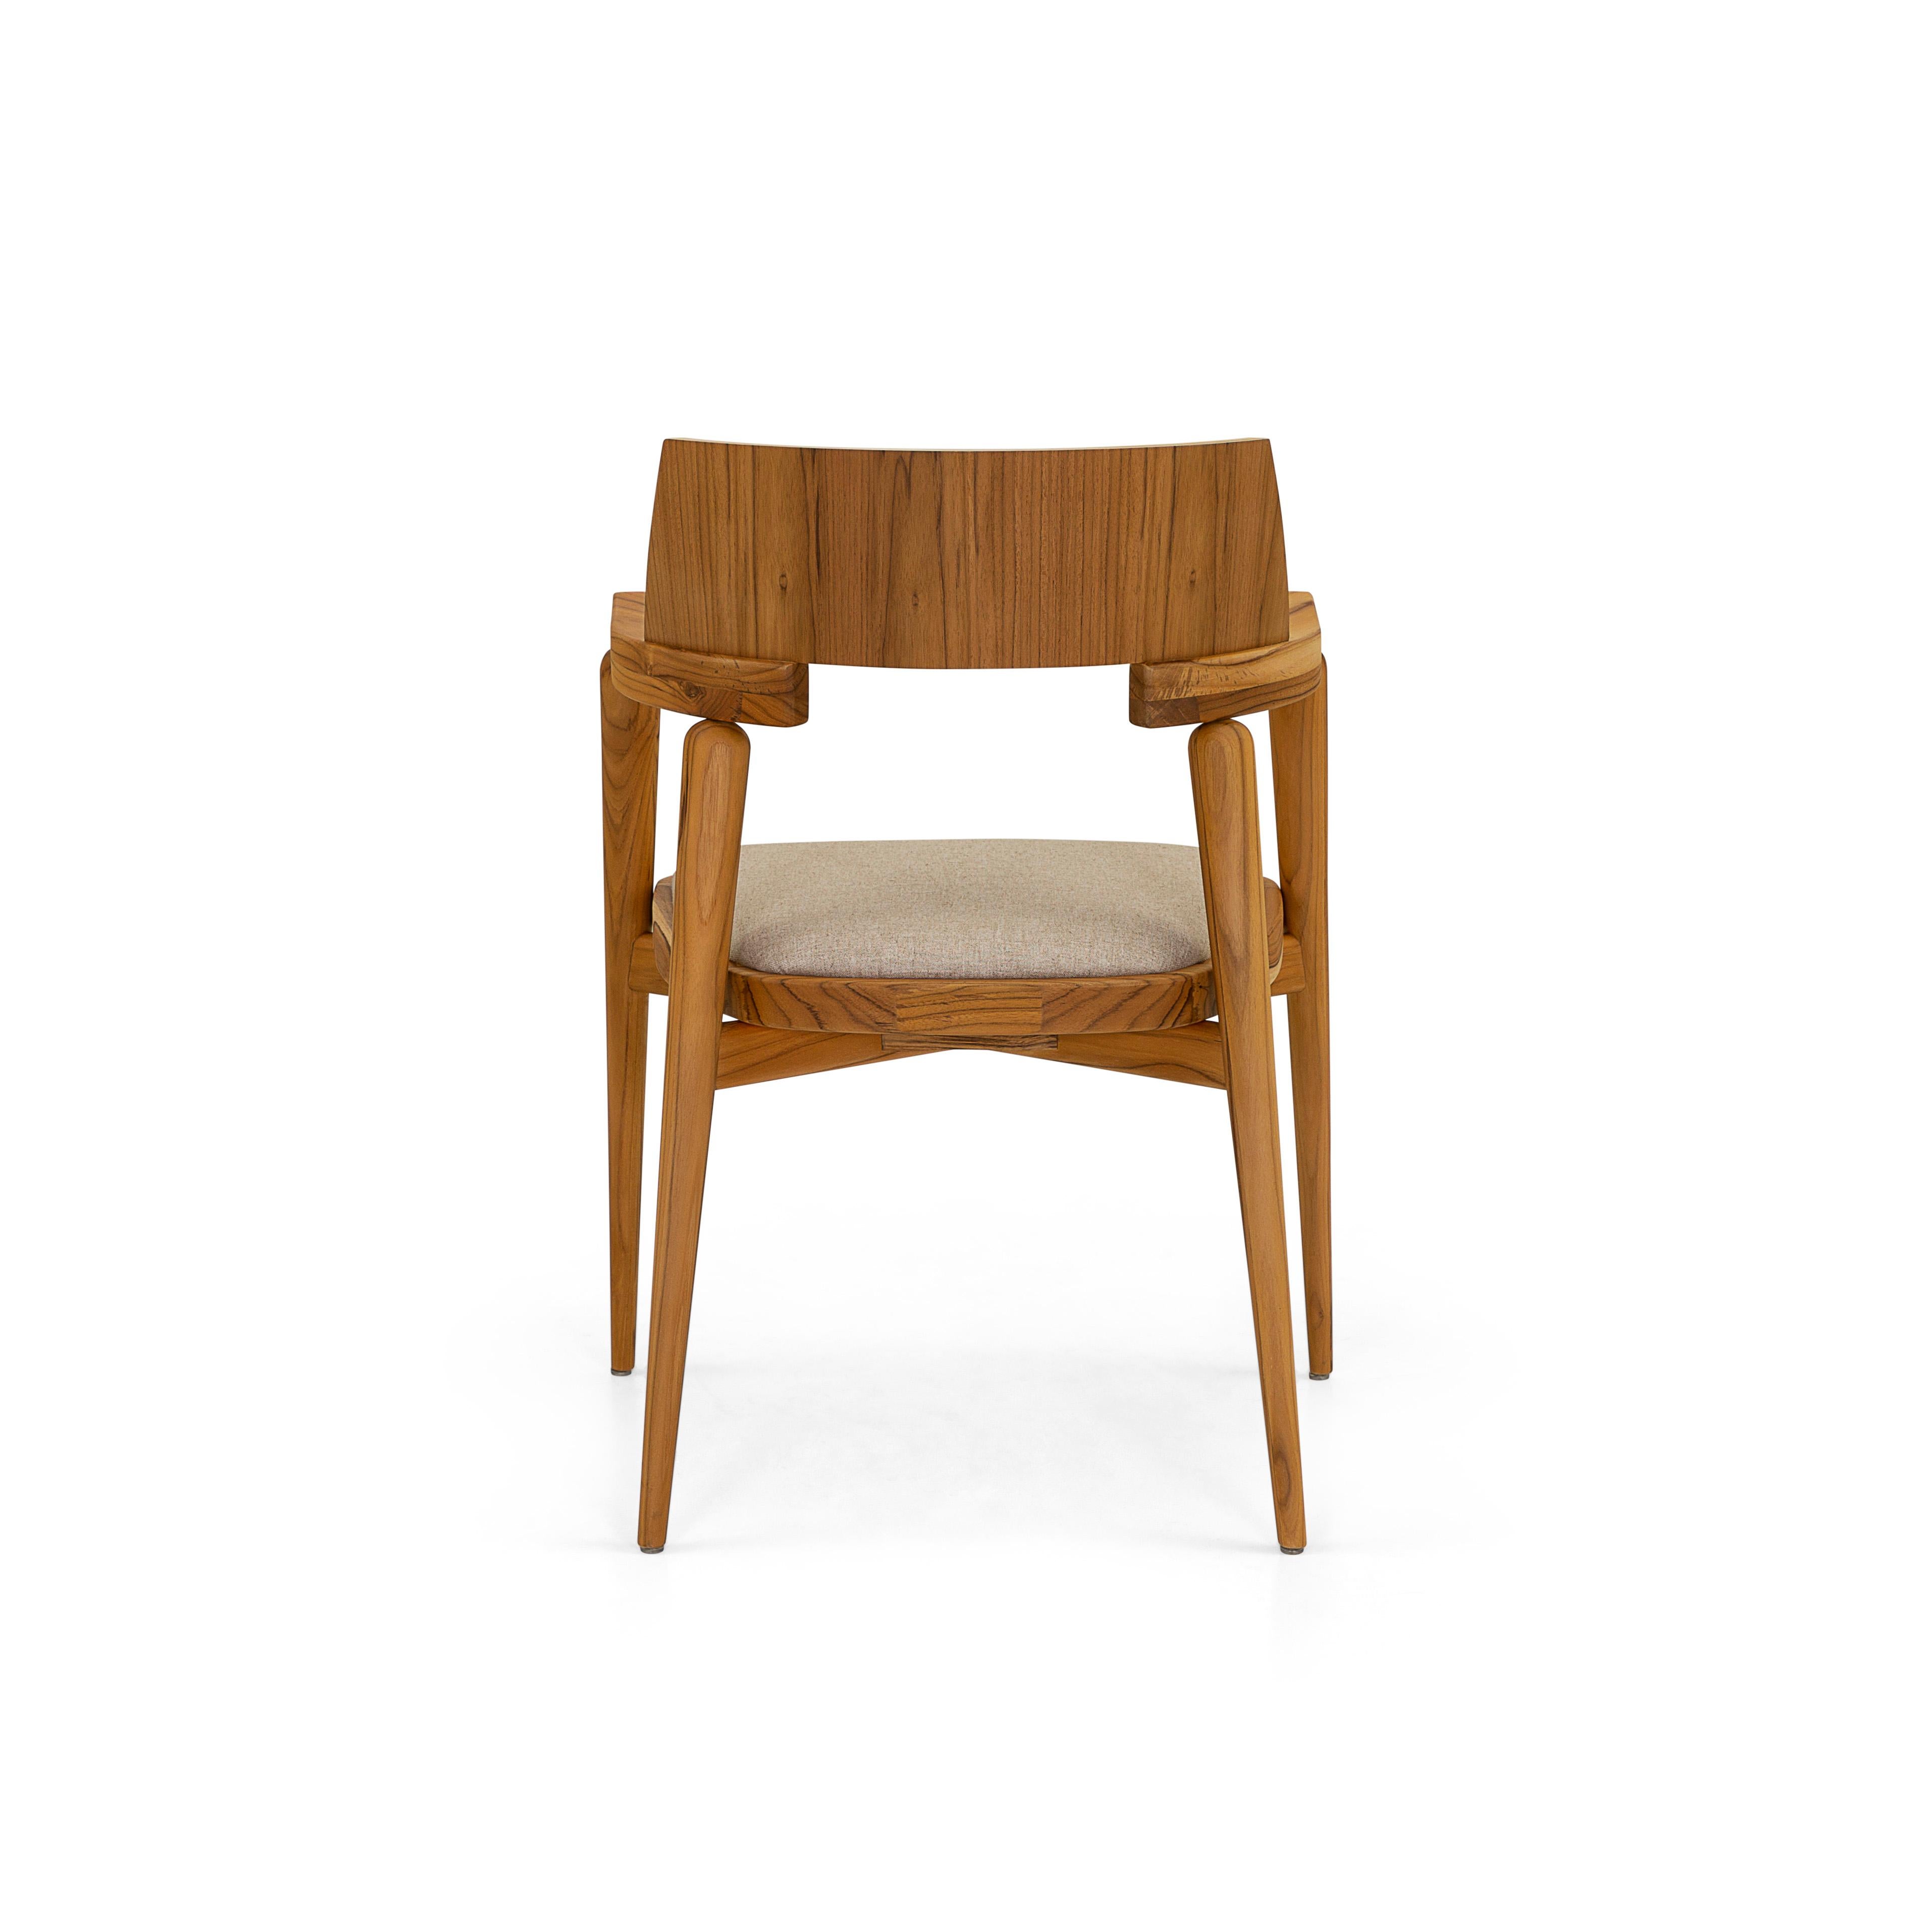 Contemporary Bone Dining Chair / Desk Chair in Teak Wood Finish and Oatmeal Fabric For Sale